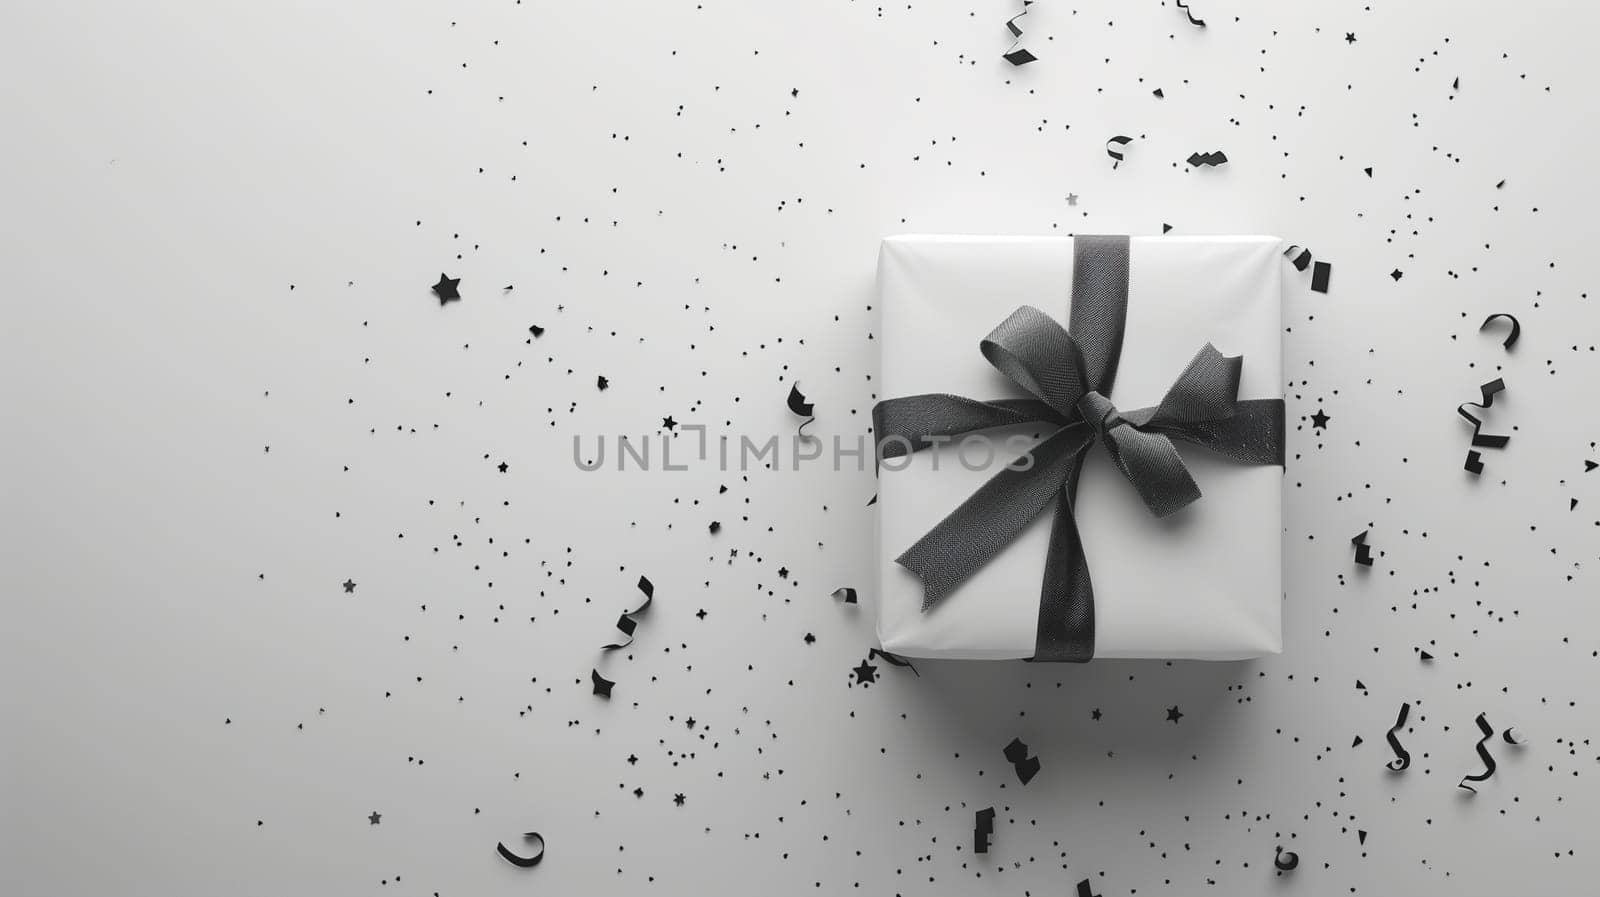 A white gift box sits prominently with a sleek black bow on top. The box exudes elegance and sophistication, perfect for gifting on special occasions like birthdays or holidays.